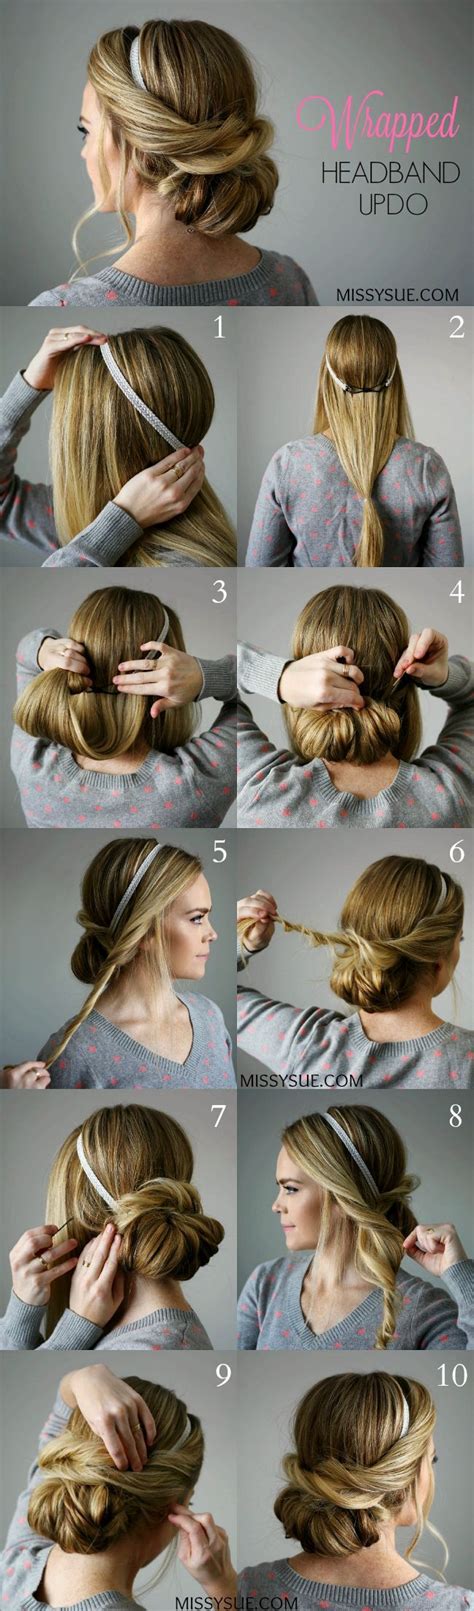 15 Easy Prom Wedding Hairstyles For Medium To Long Hair You Can Diy At